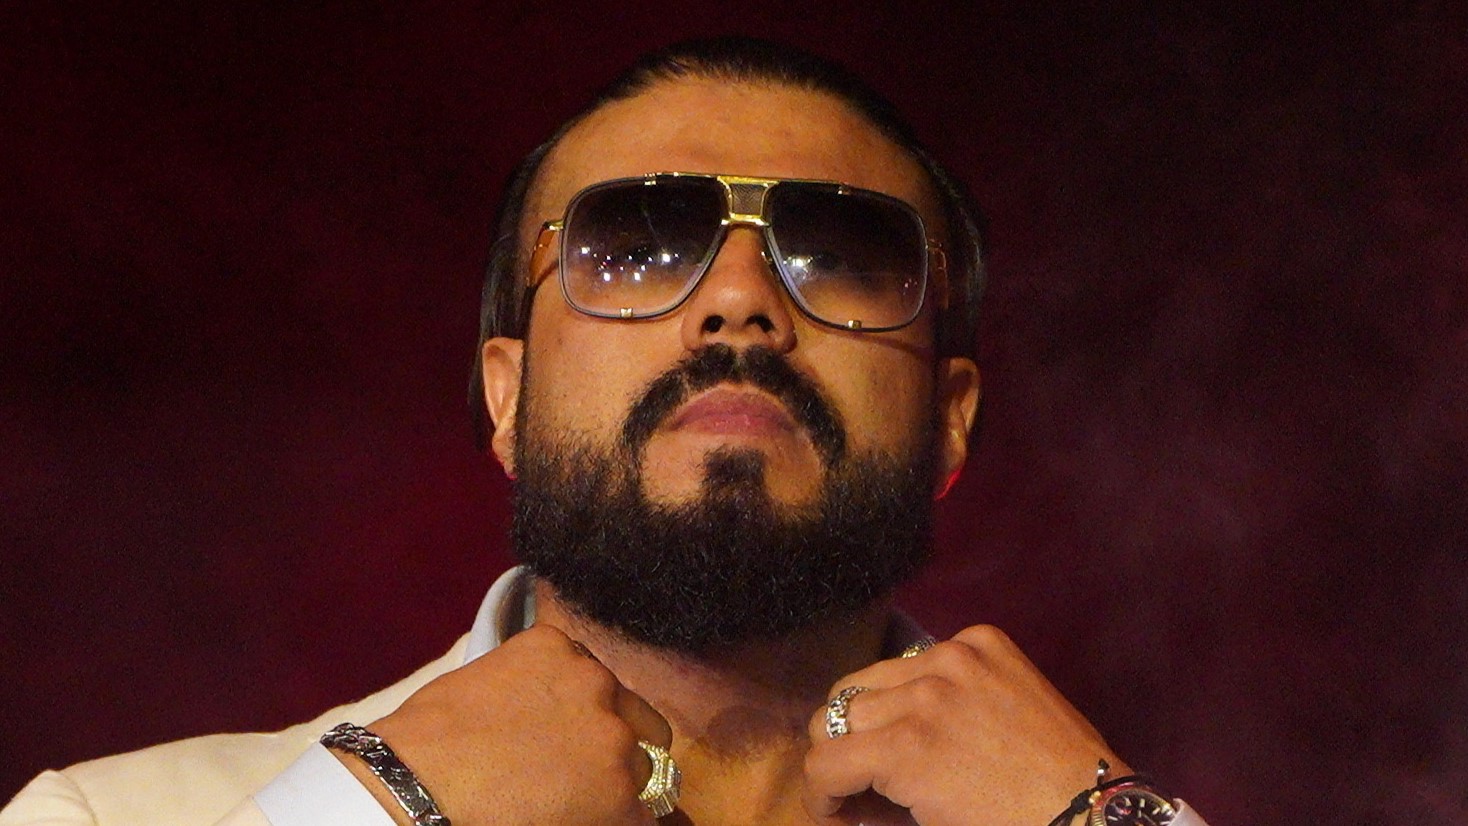 Andrade El Idolo Seems To Agree With Criticism Of His AEW Booking